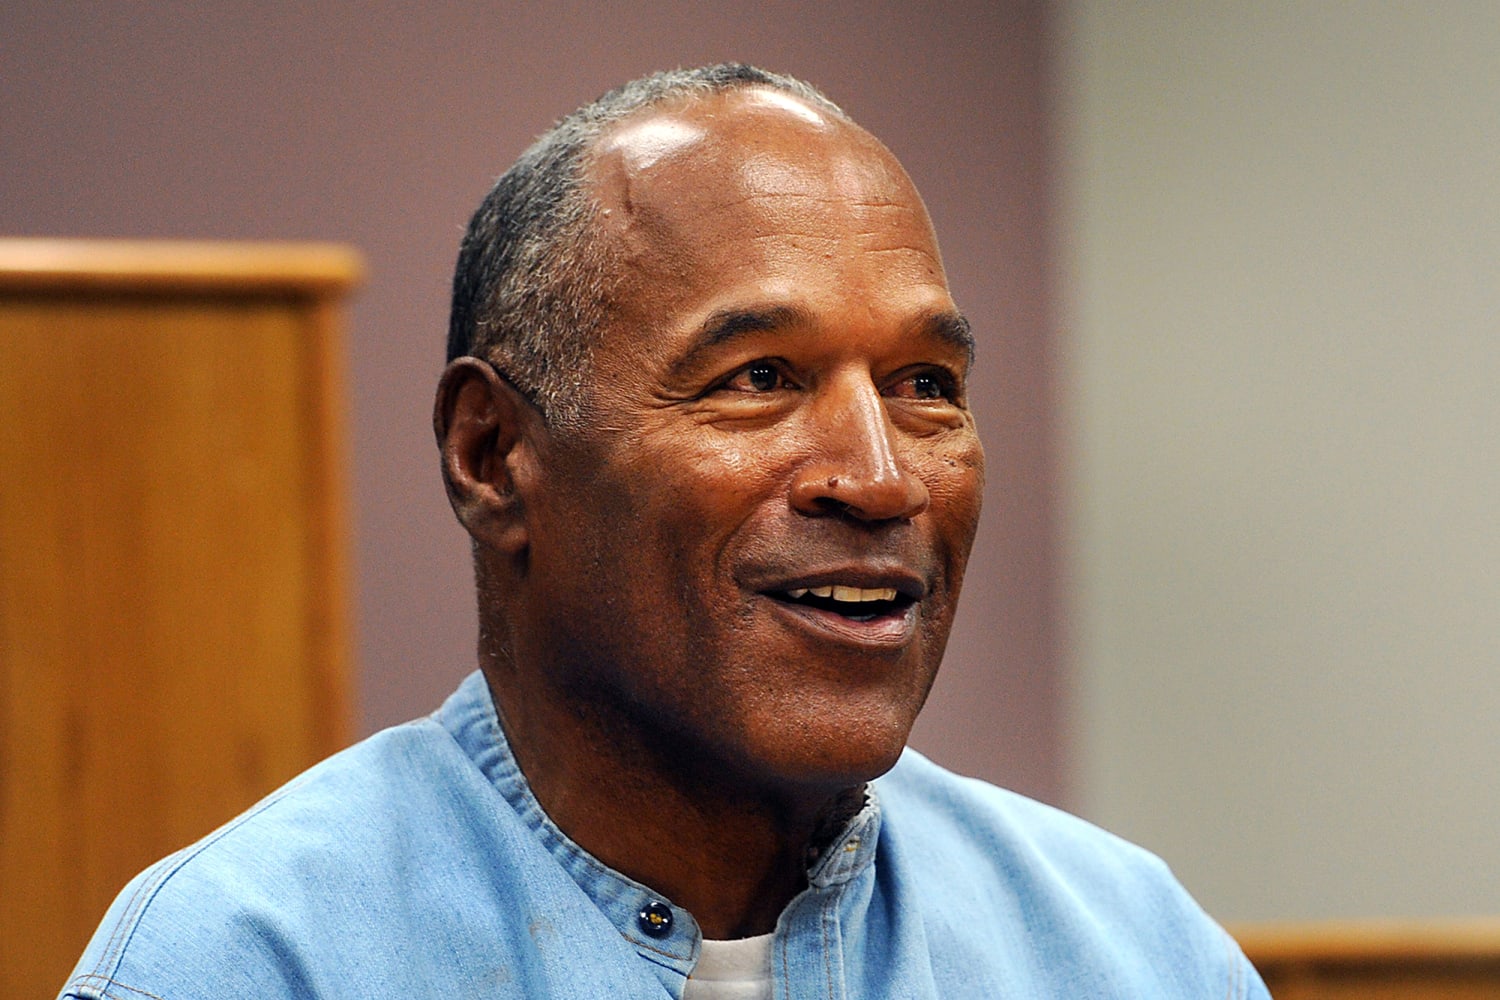 O.J. Simpson no longer on parole, discharged early in robbery case